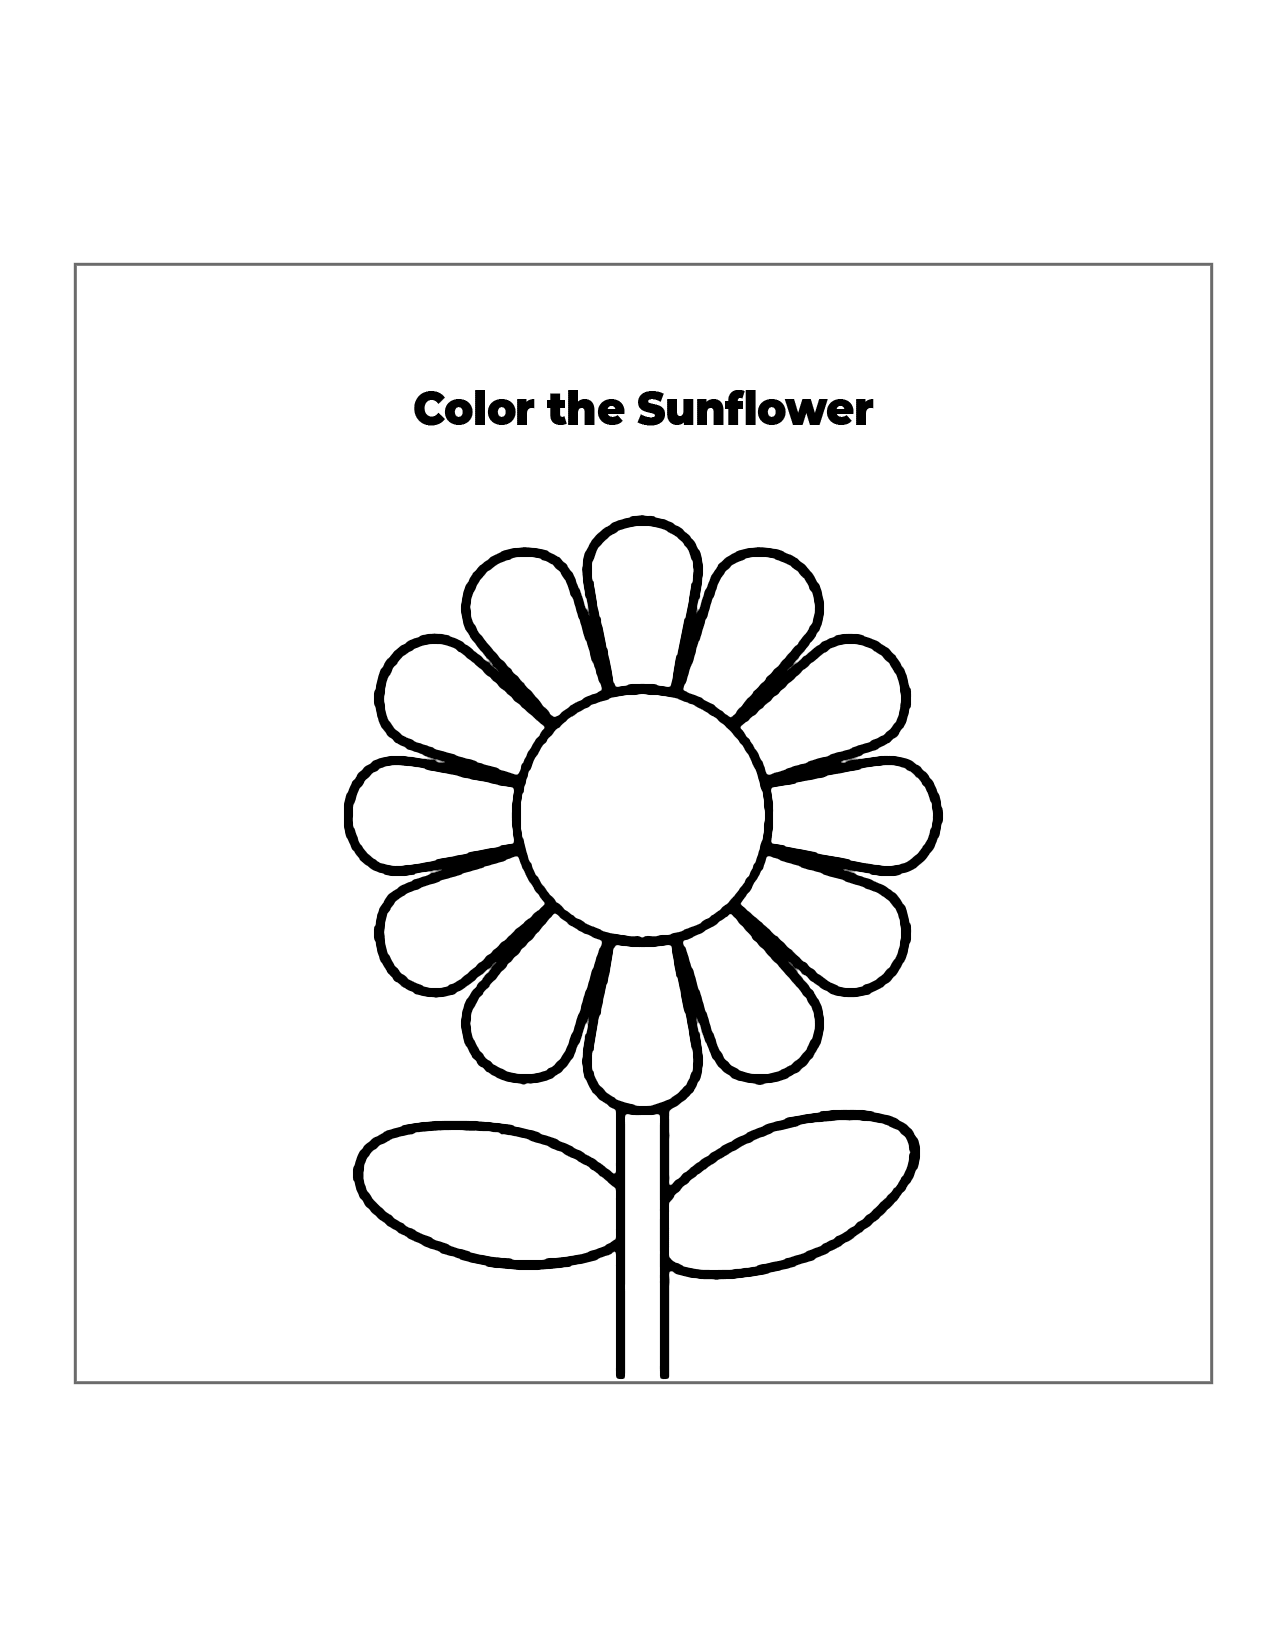 Easy Sunflower Coloring Page